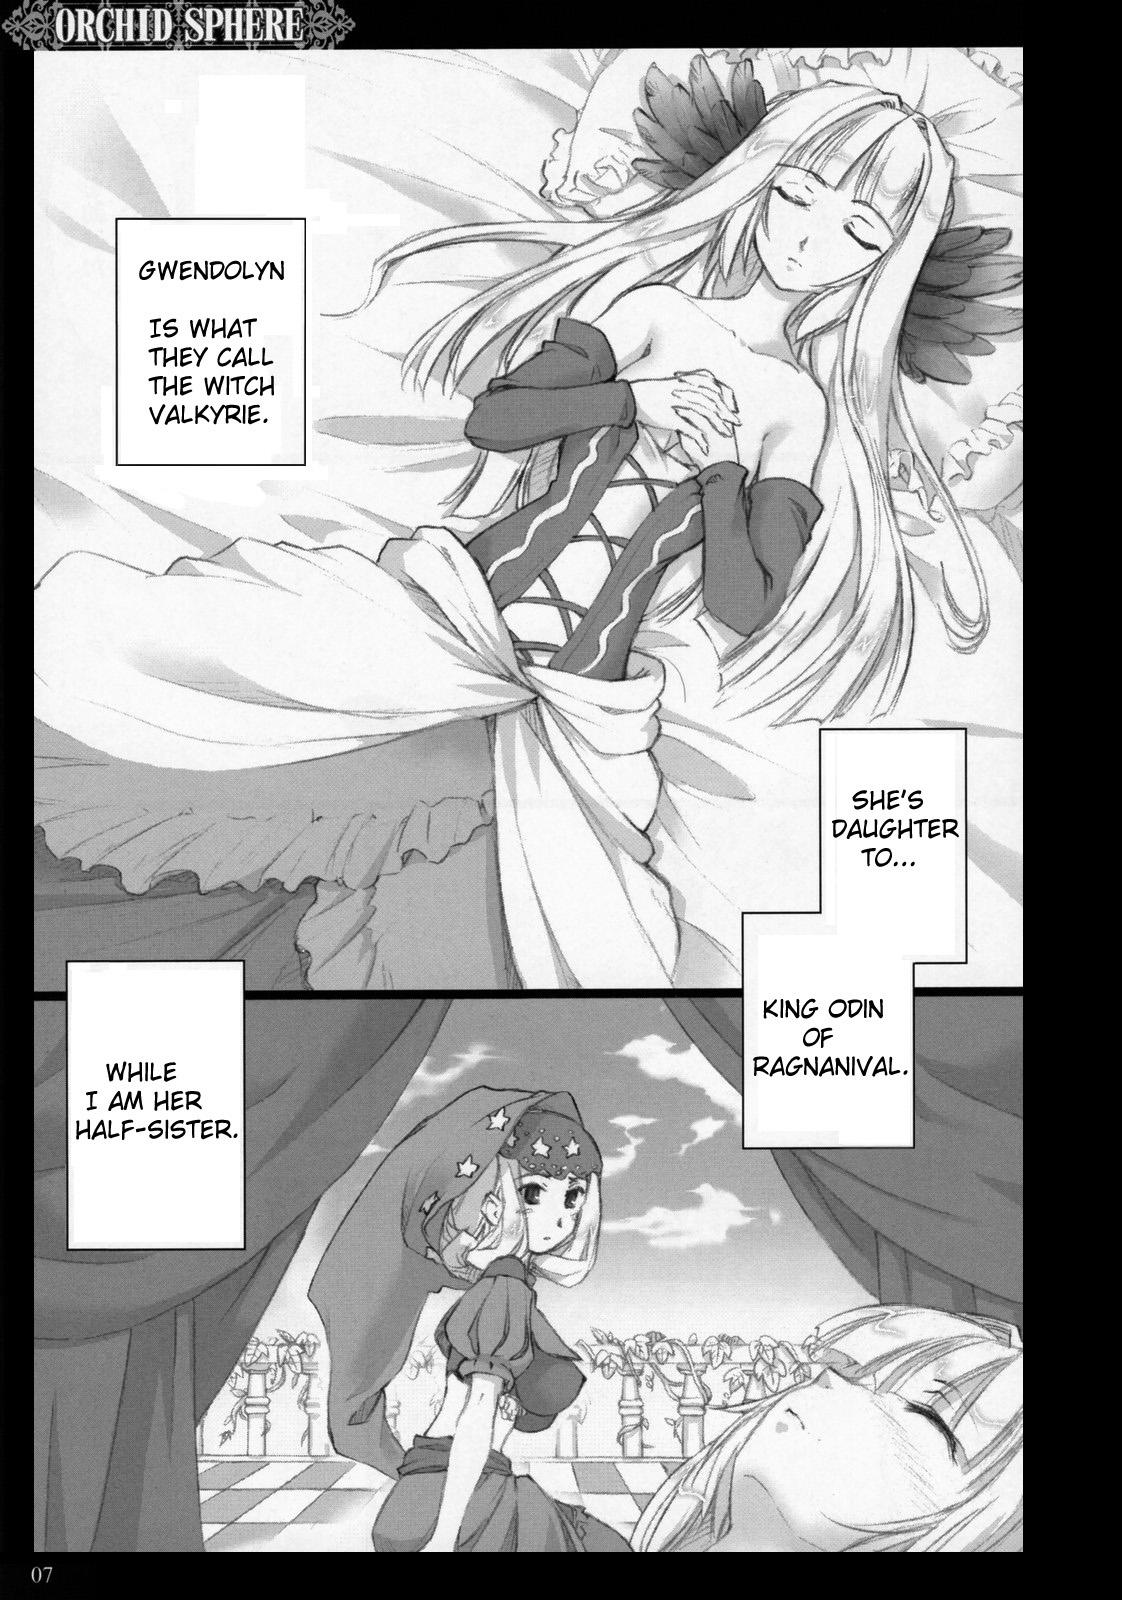 Panty Orchid Sphere - Odin sphere Sperm - Page 6